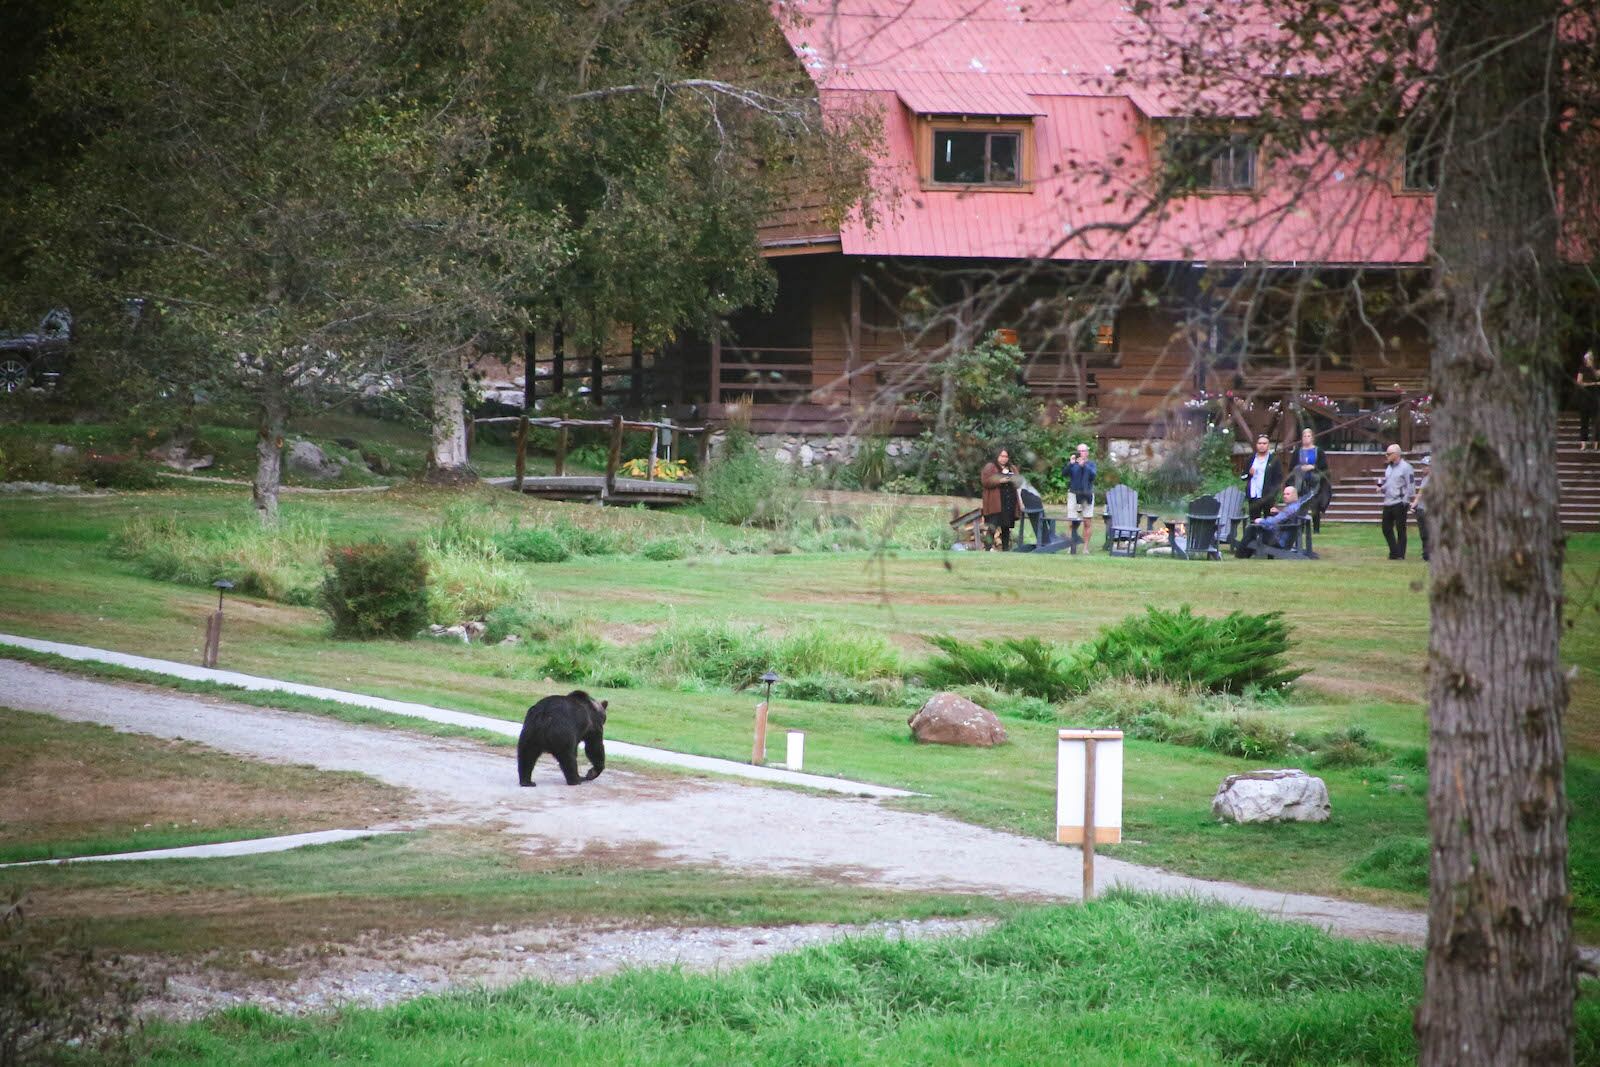 A grizzly walking across the. lawn while guests watch